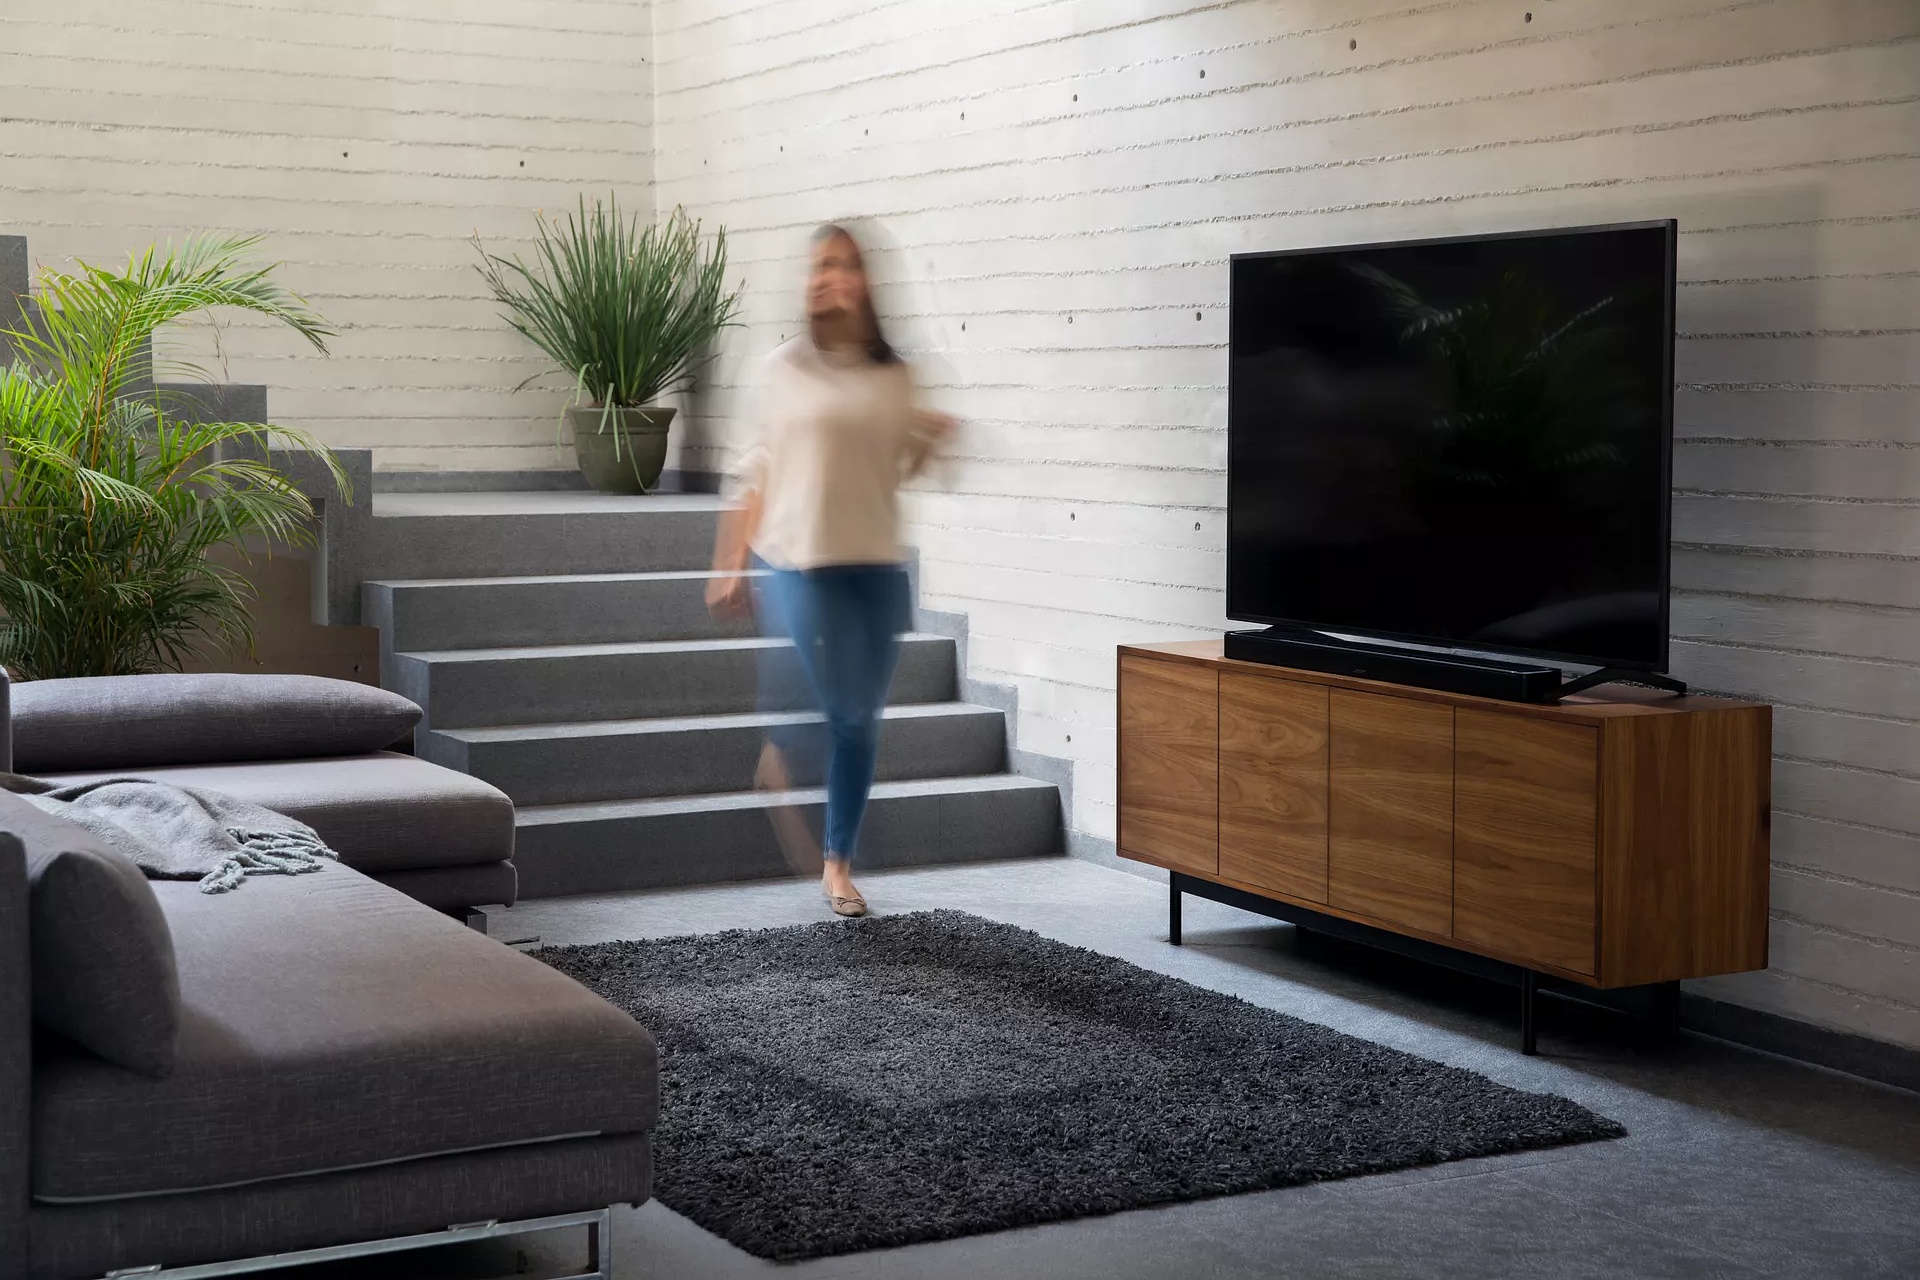 Woman walking downstairs into living room as music plays from a Bose Soundbar